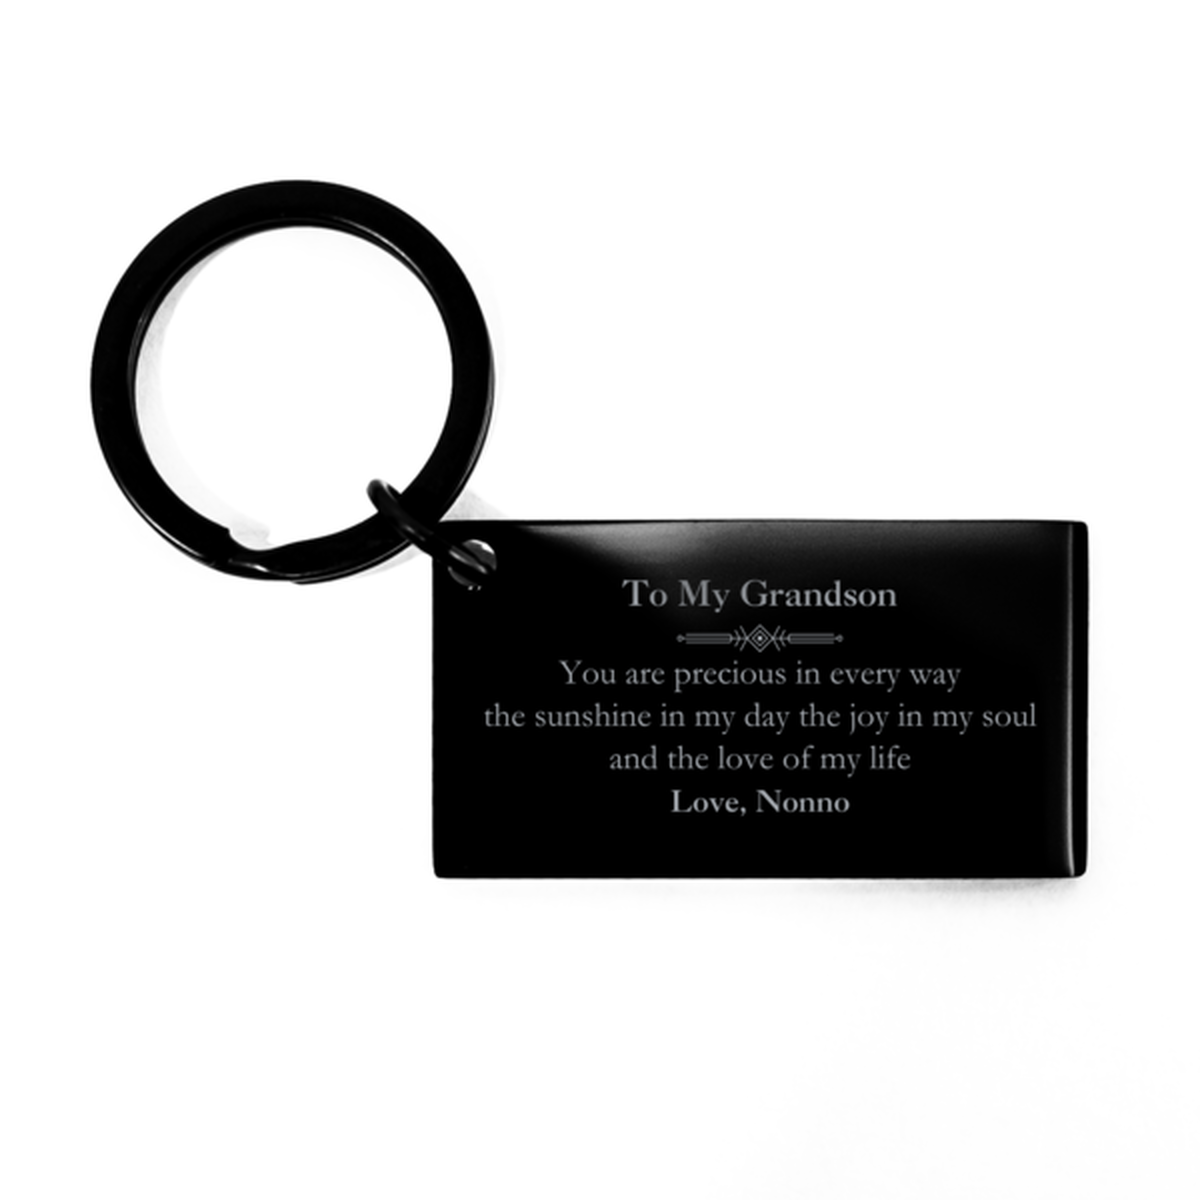 Graduation Gifts for Grandson Keychain Present from Nonno, Christmas Grandson Birthday Gifts Grandson You are precious in every way the sunshine in my day. Love, Nonno